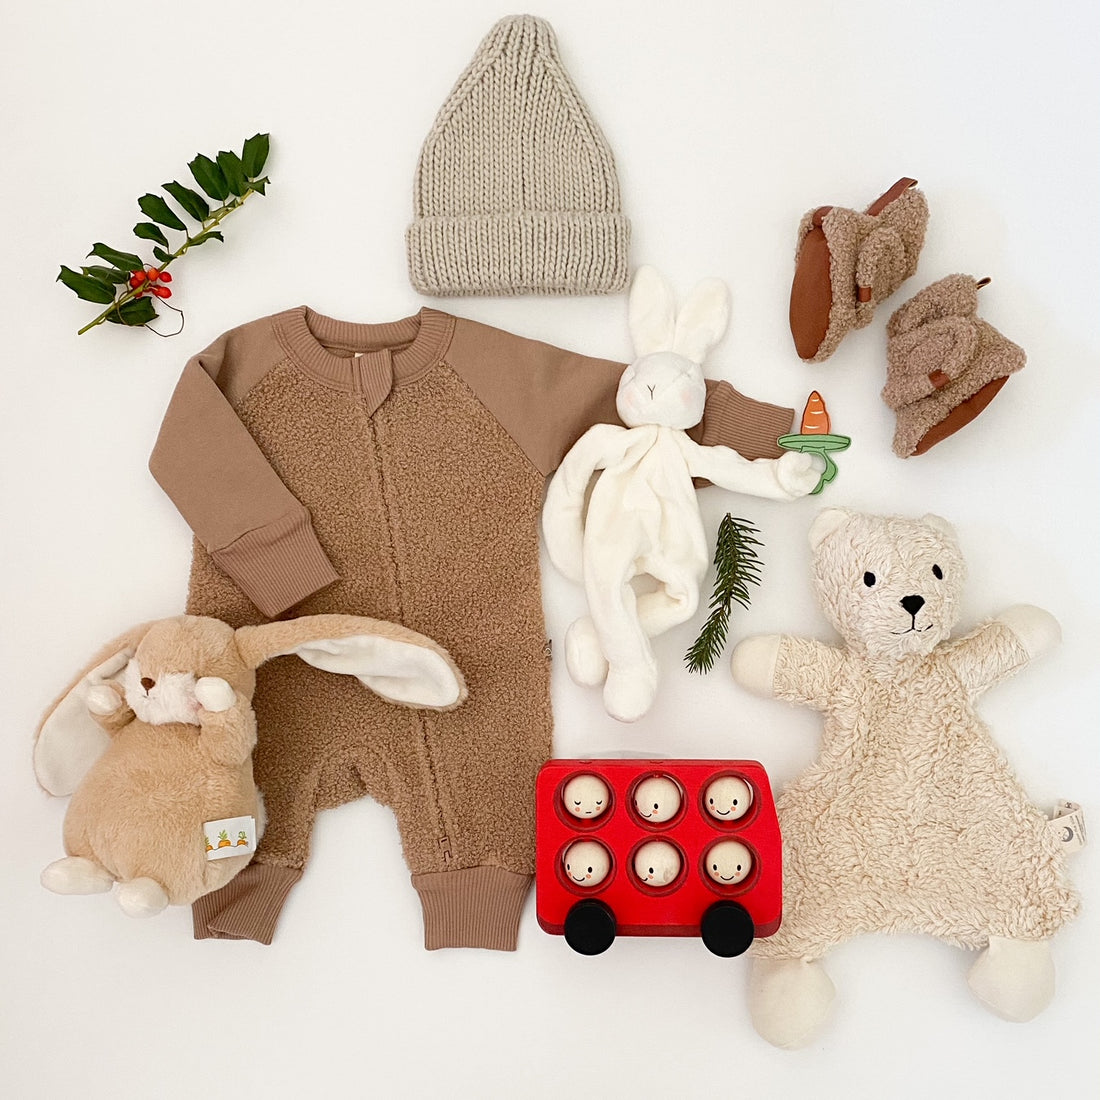 The Holiday Gift Guide for Baby